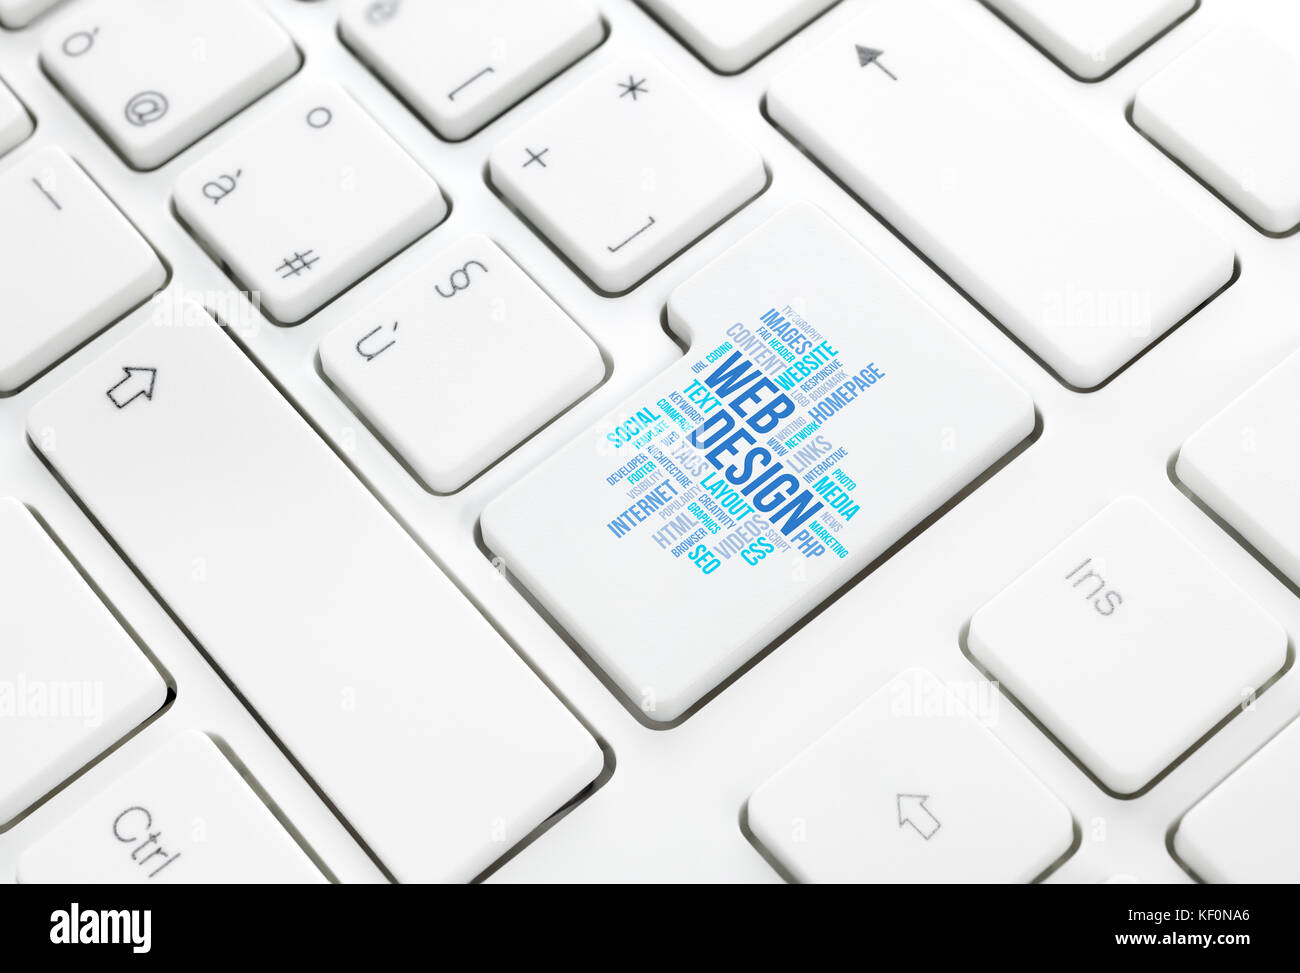 Web Design business concept word cloud  in enter button or key on white keyboard Stock Photo